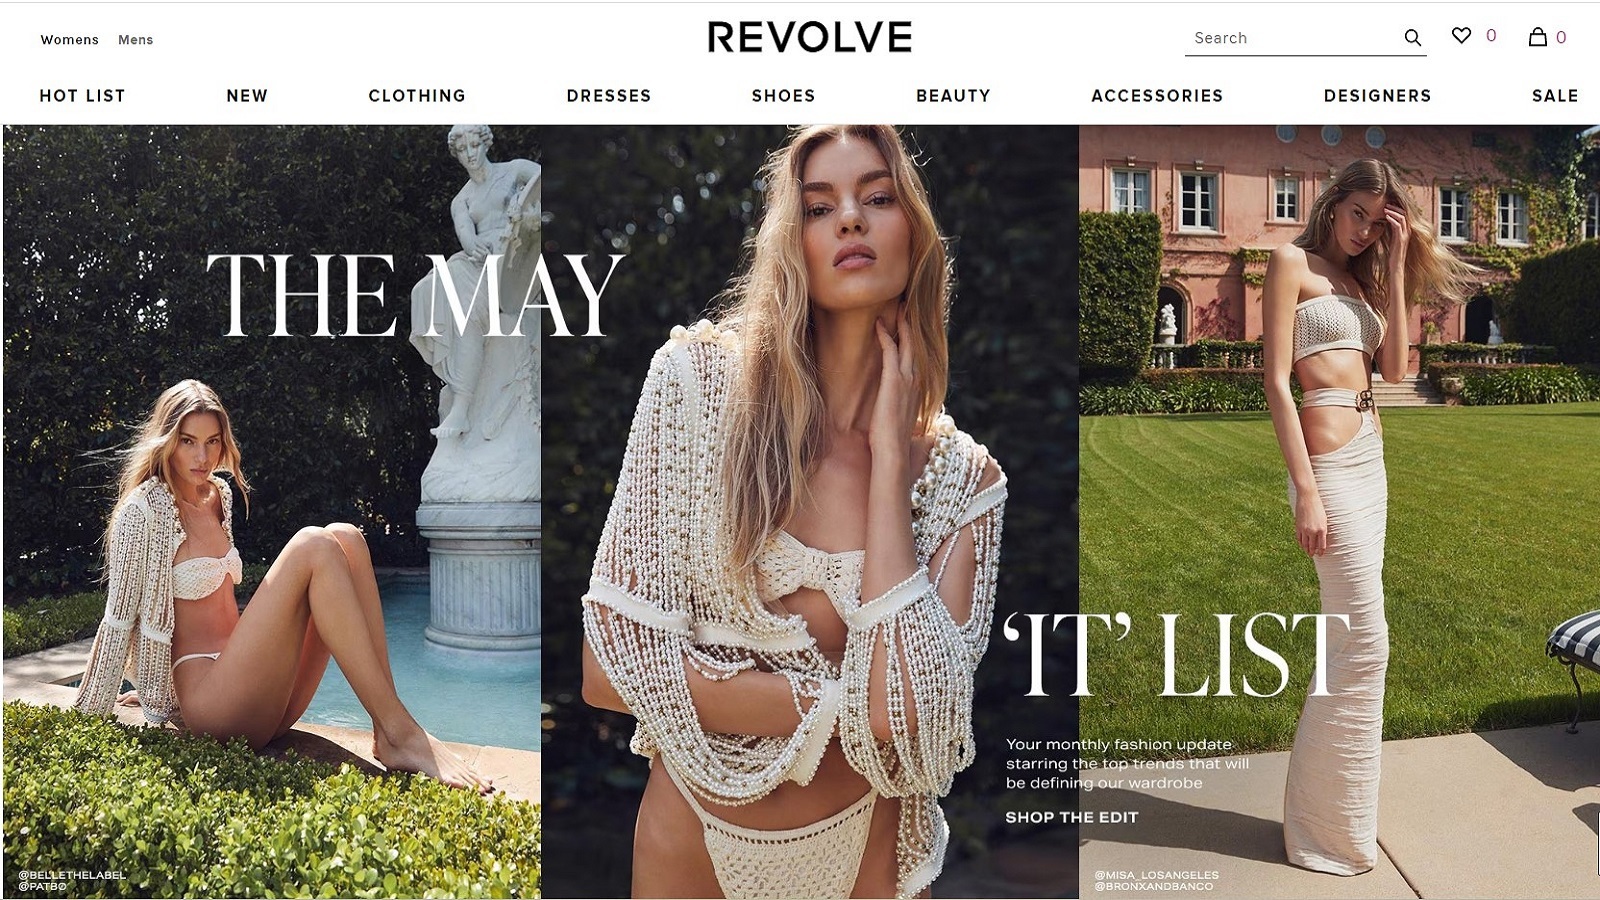 Revolve Clothing Review: Is It Worth Paying High Fees For These Unique Designs?